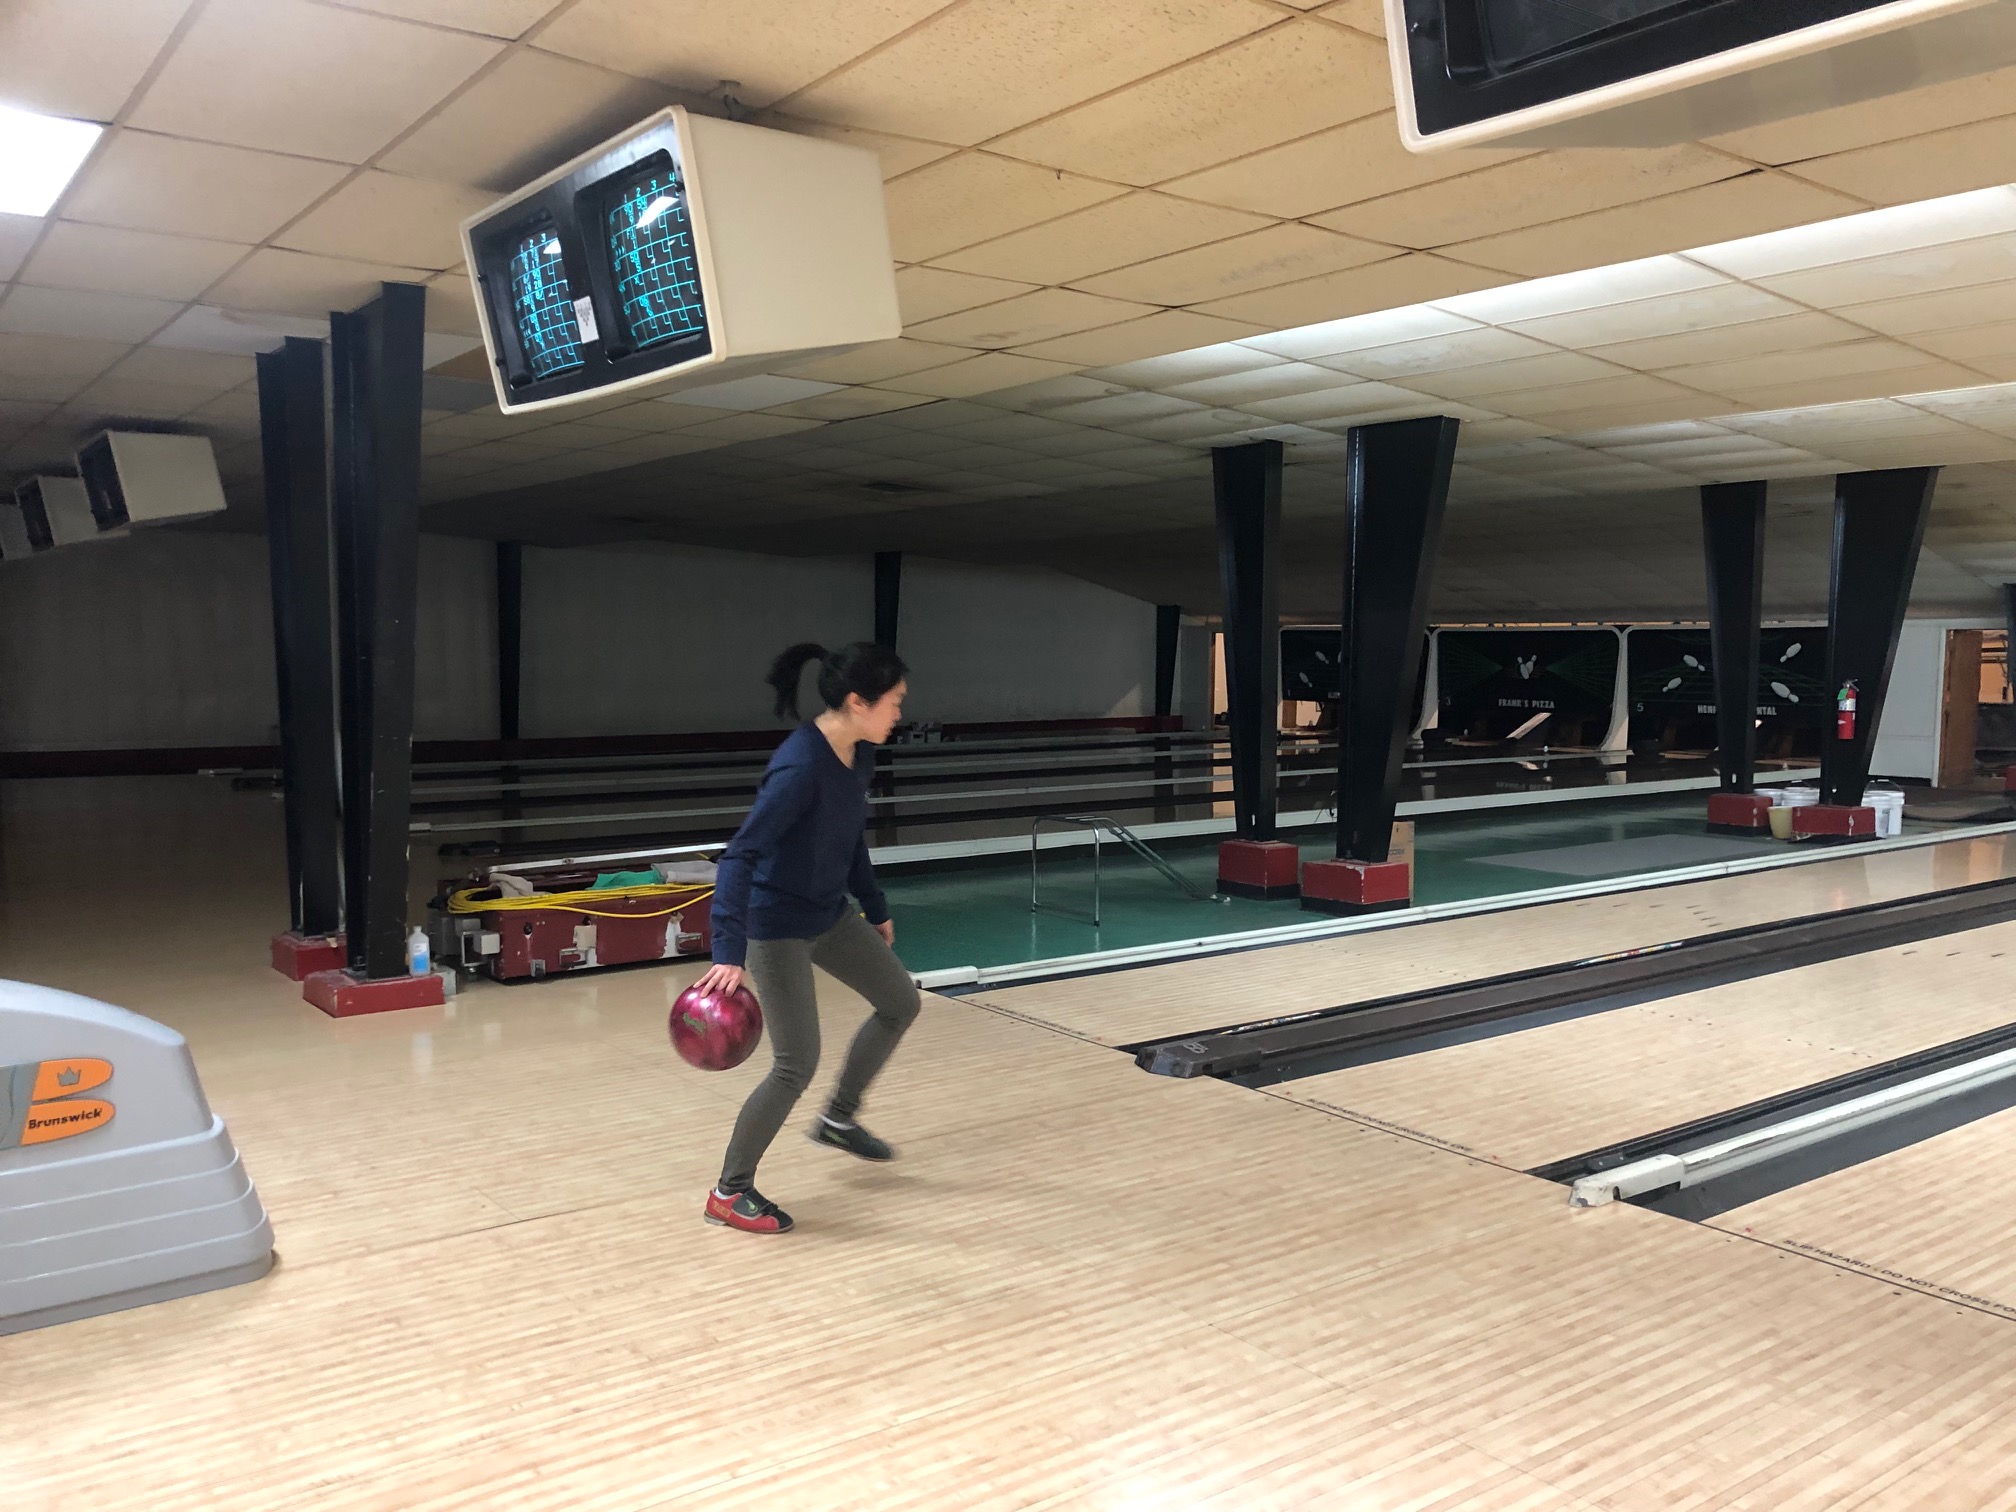 Resident bowling